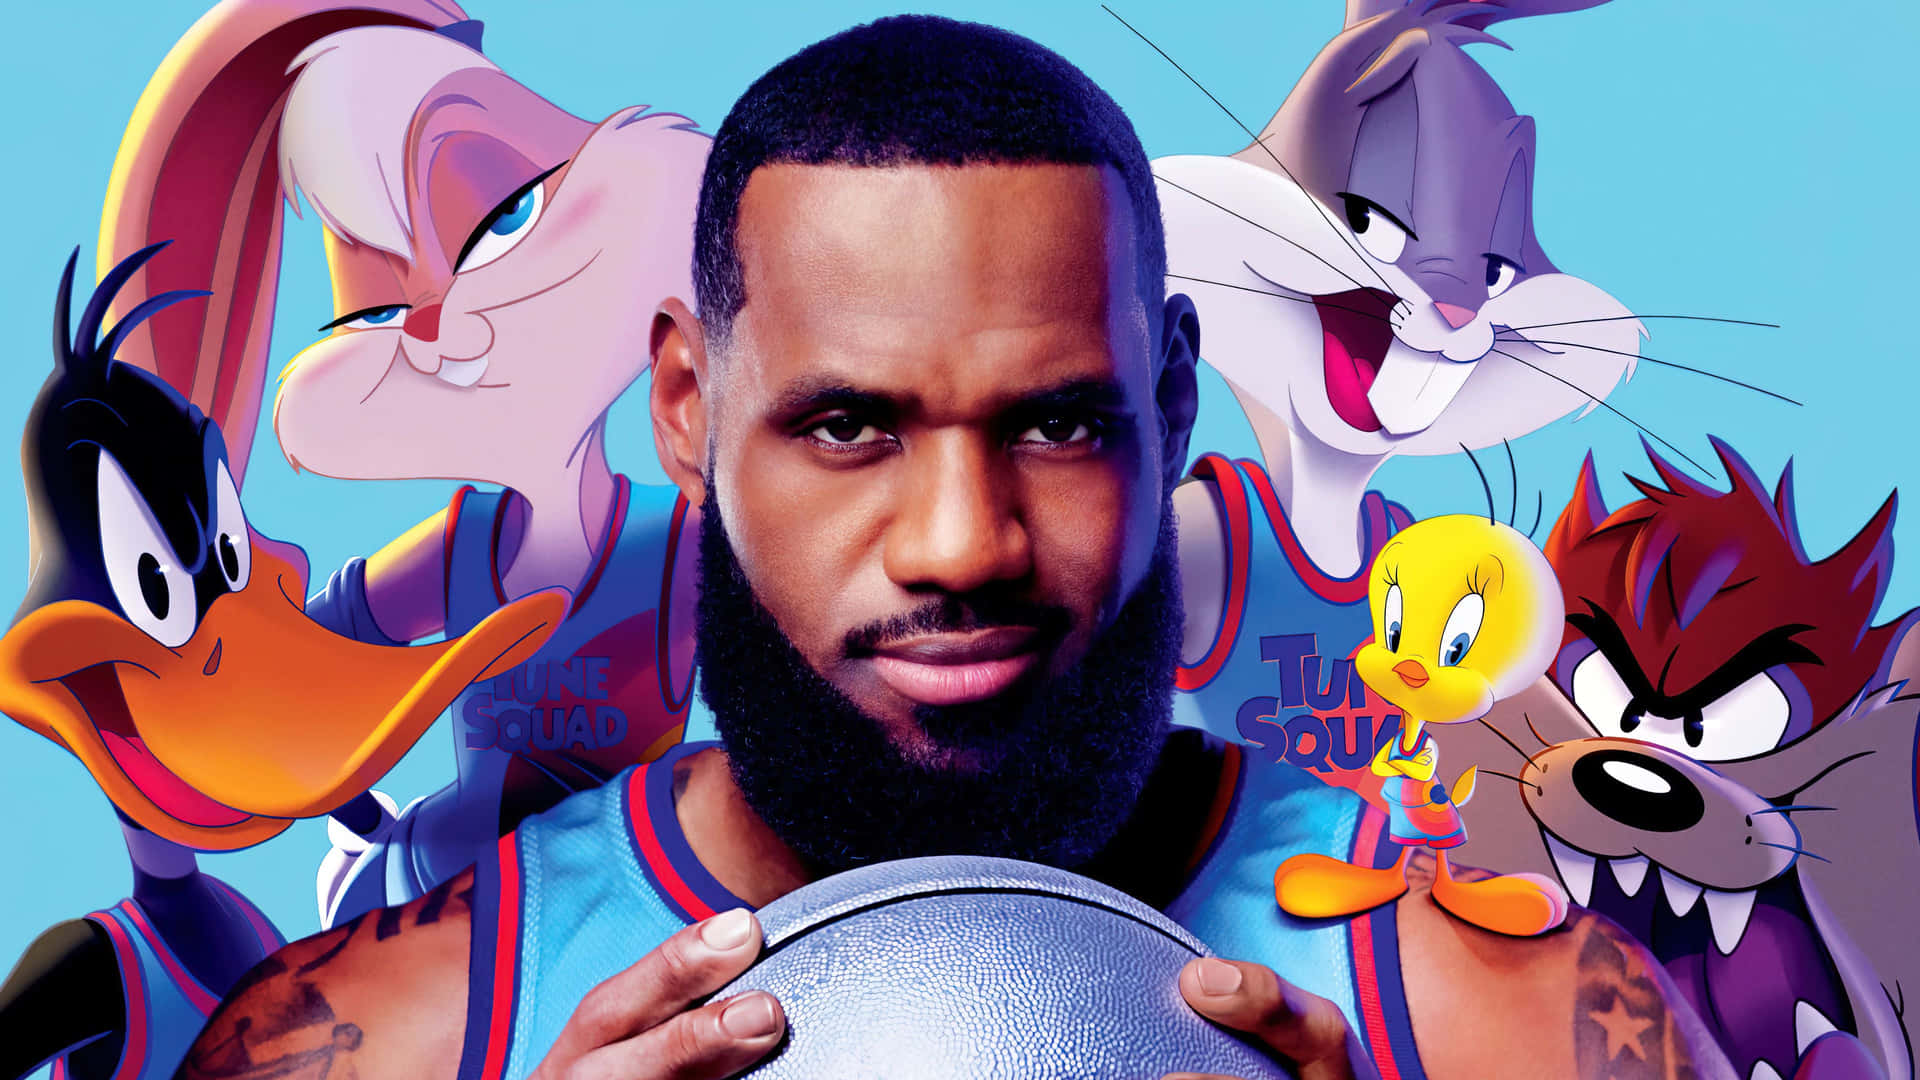 Join LeBron James and the Tune Squad on a galactic adventure in Space Jam: A New Legacy. Wallpaper